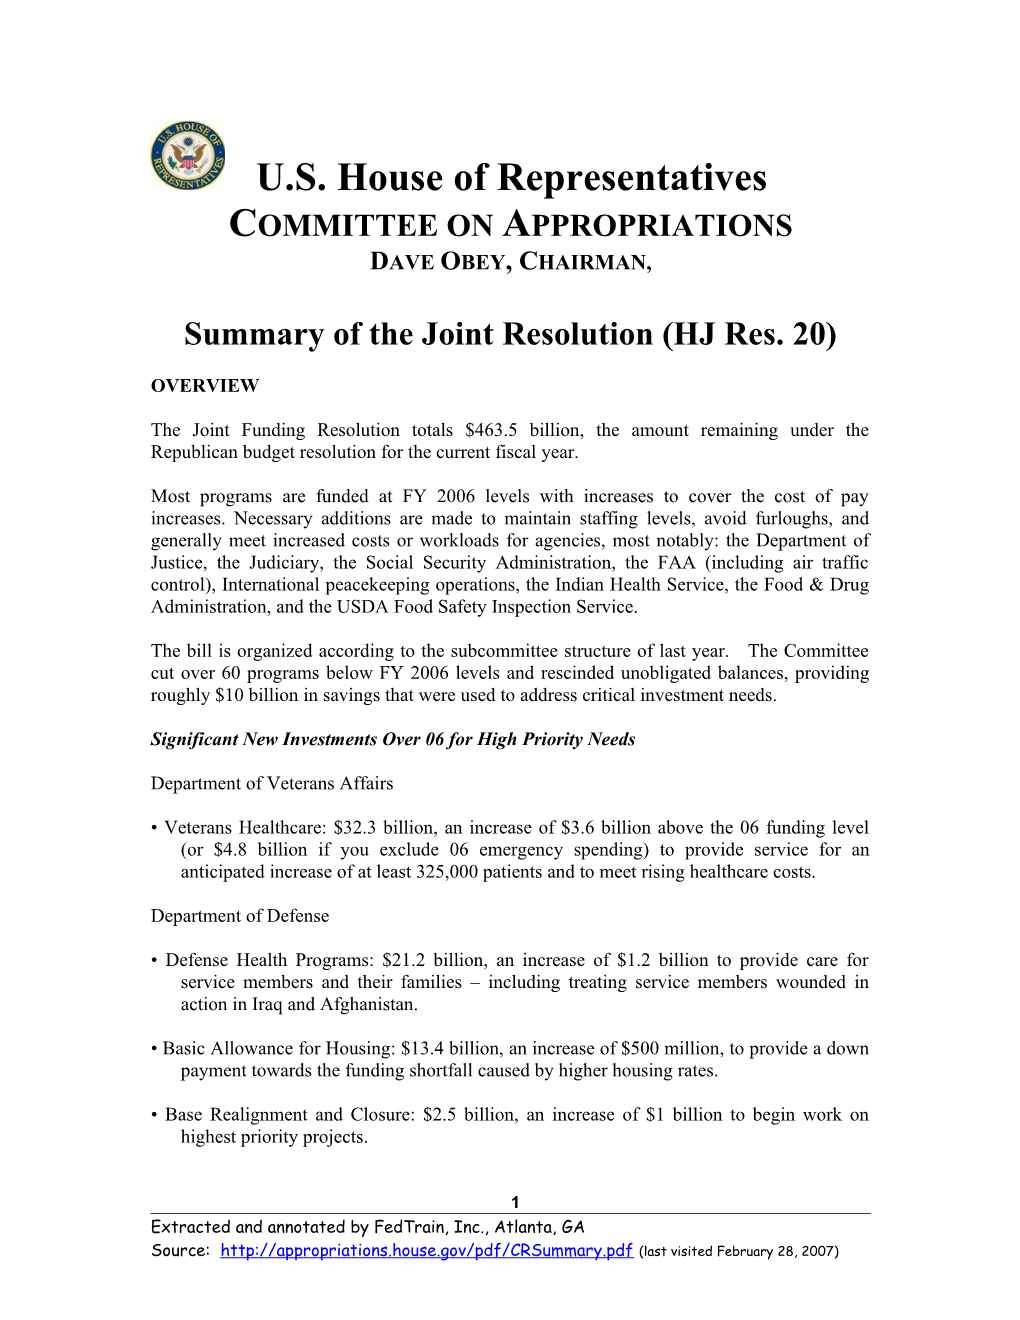 Summary of the Joint Resolution (HJ Res. 20)